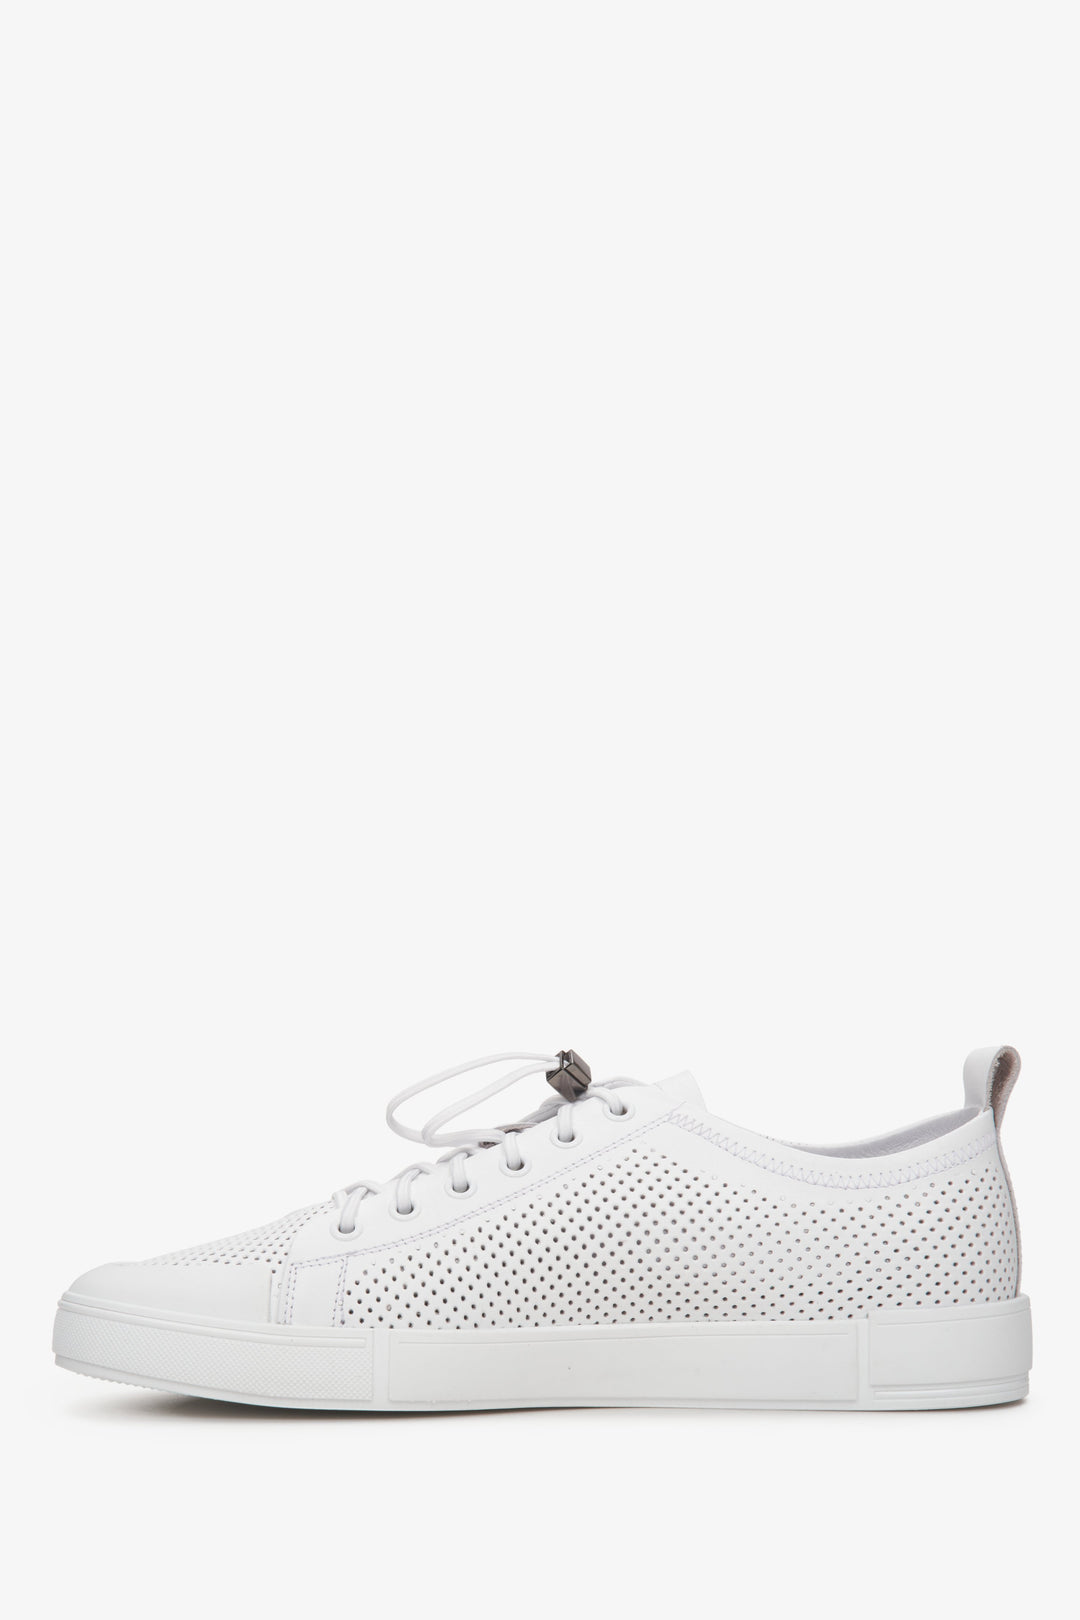 Men's summer sneakers in white, perforated.